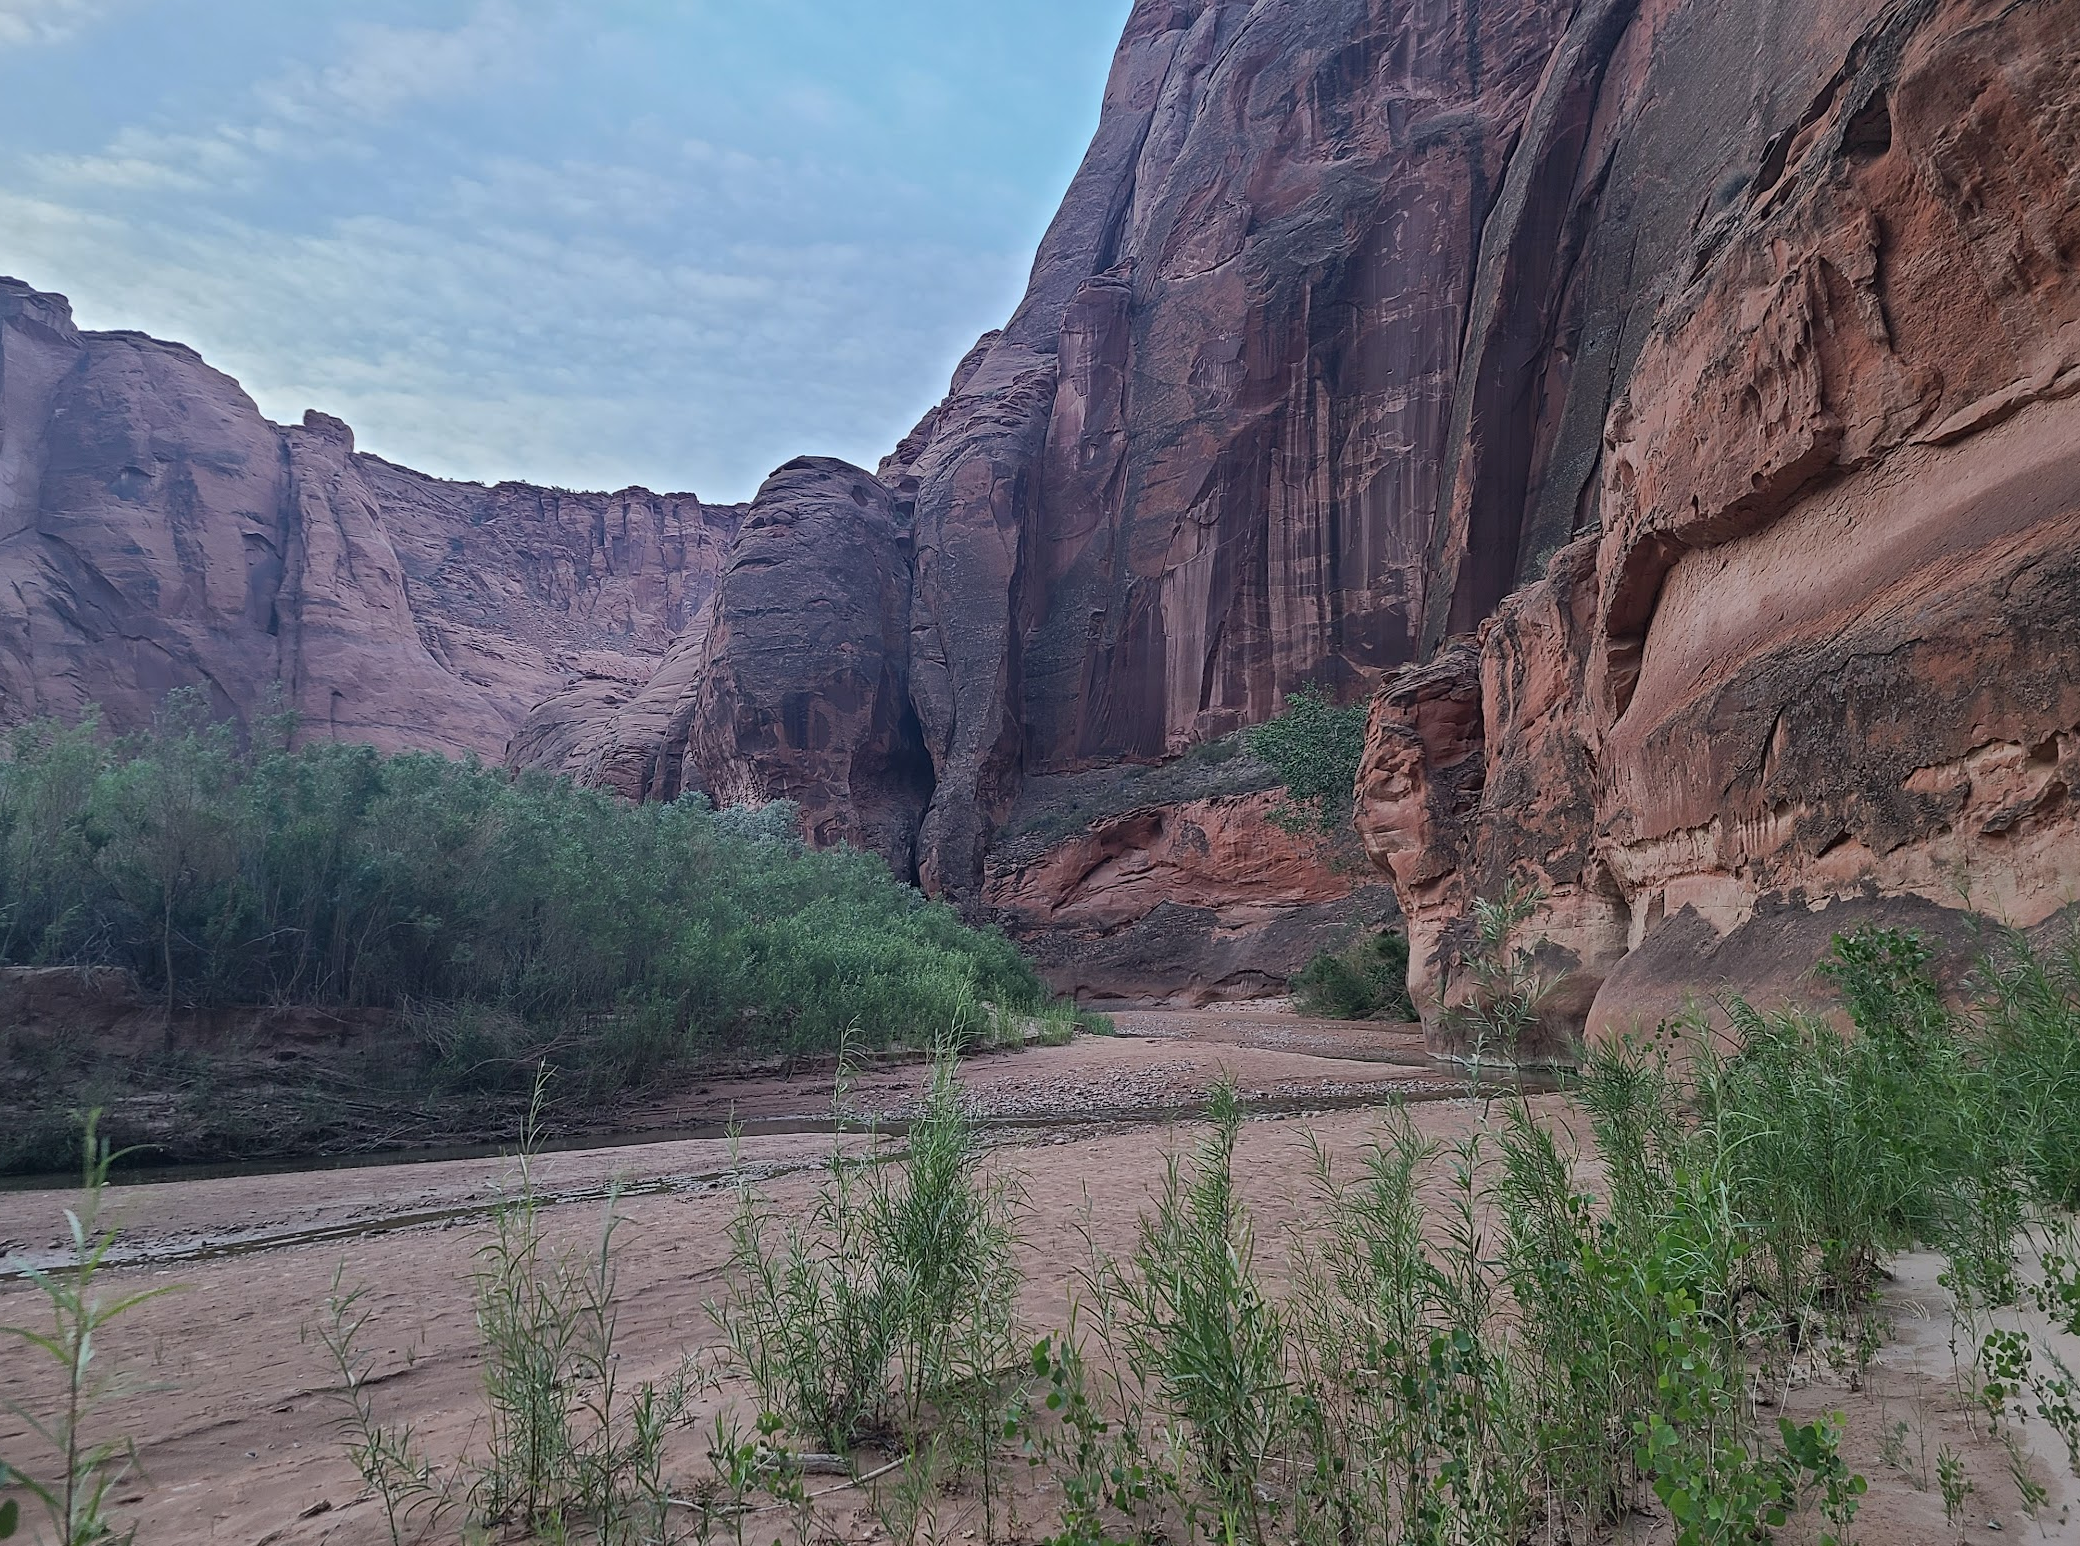 Camper submitted image from Paria Canyon Wilderness - The Hole Backcountry Campsite - 2